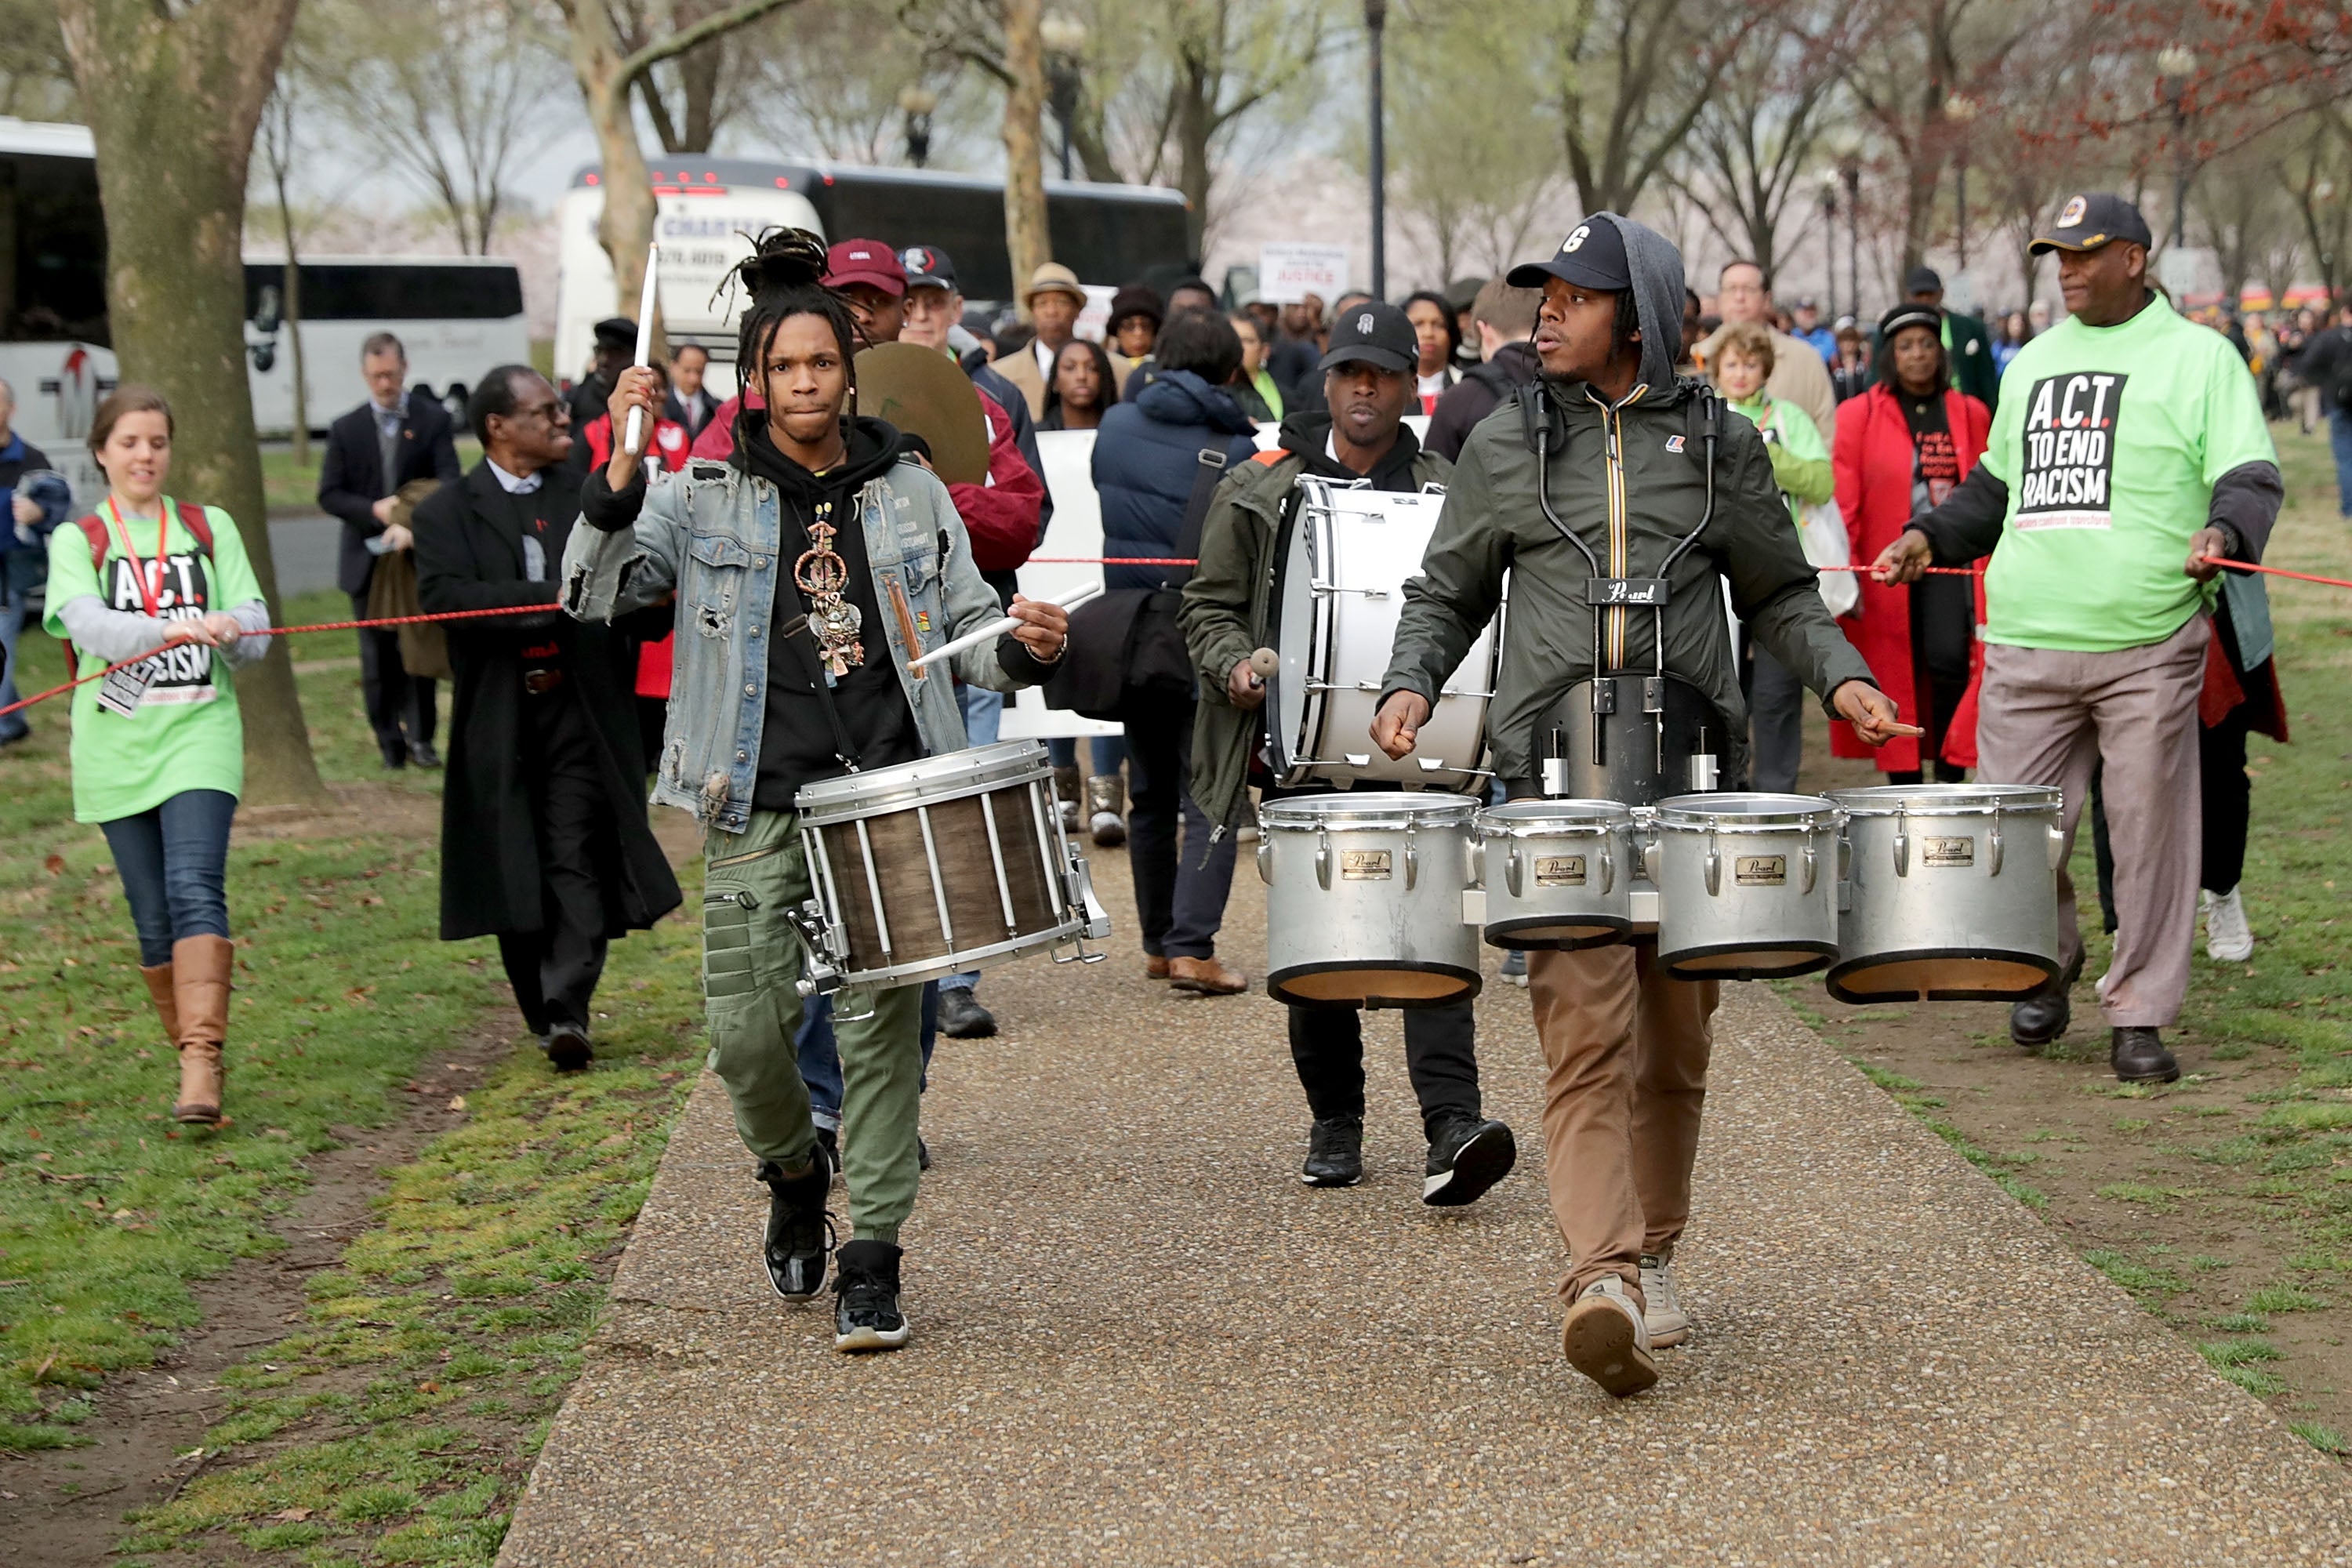 Moving Photos From Martin Luther King Jr. Tributes From Memphis, Washington D.C.and Atlanta
